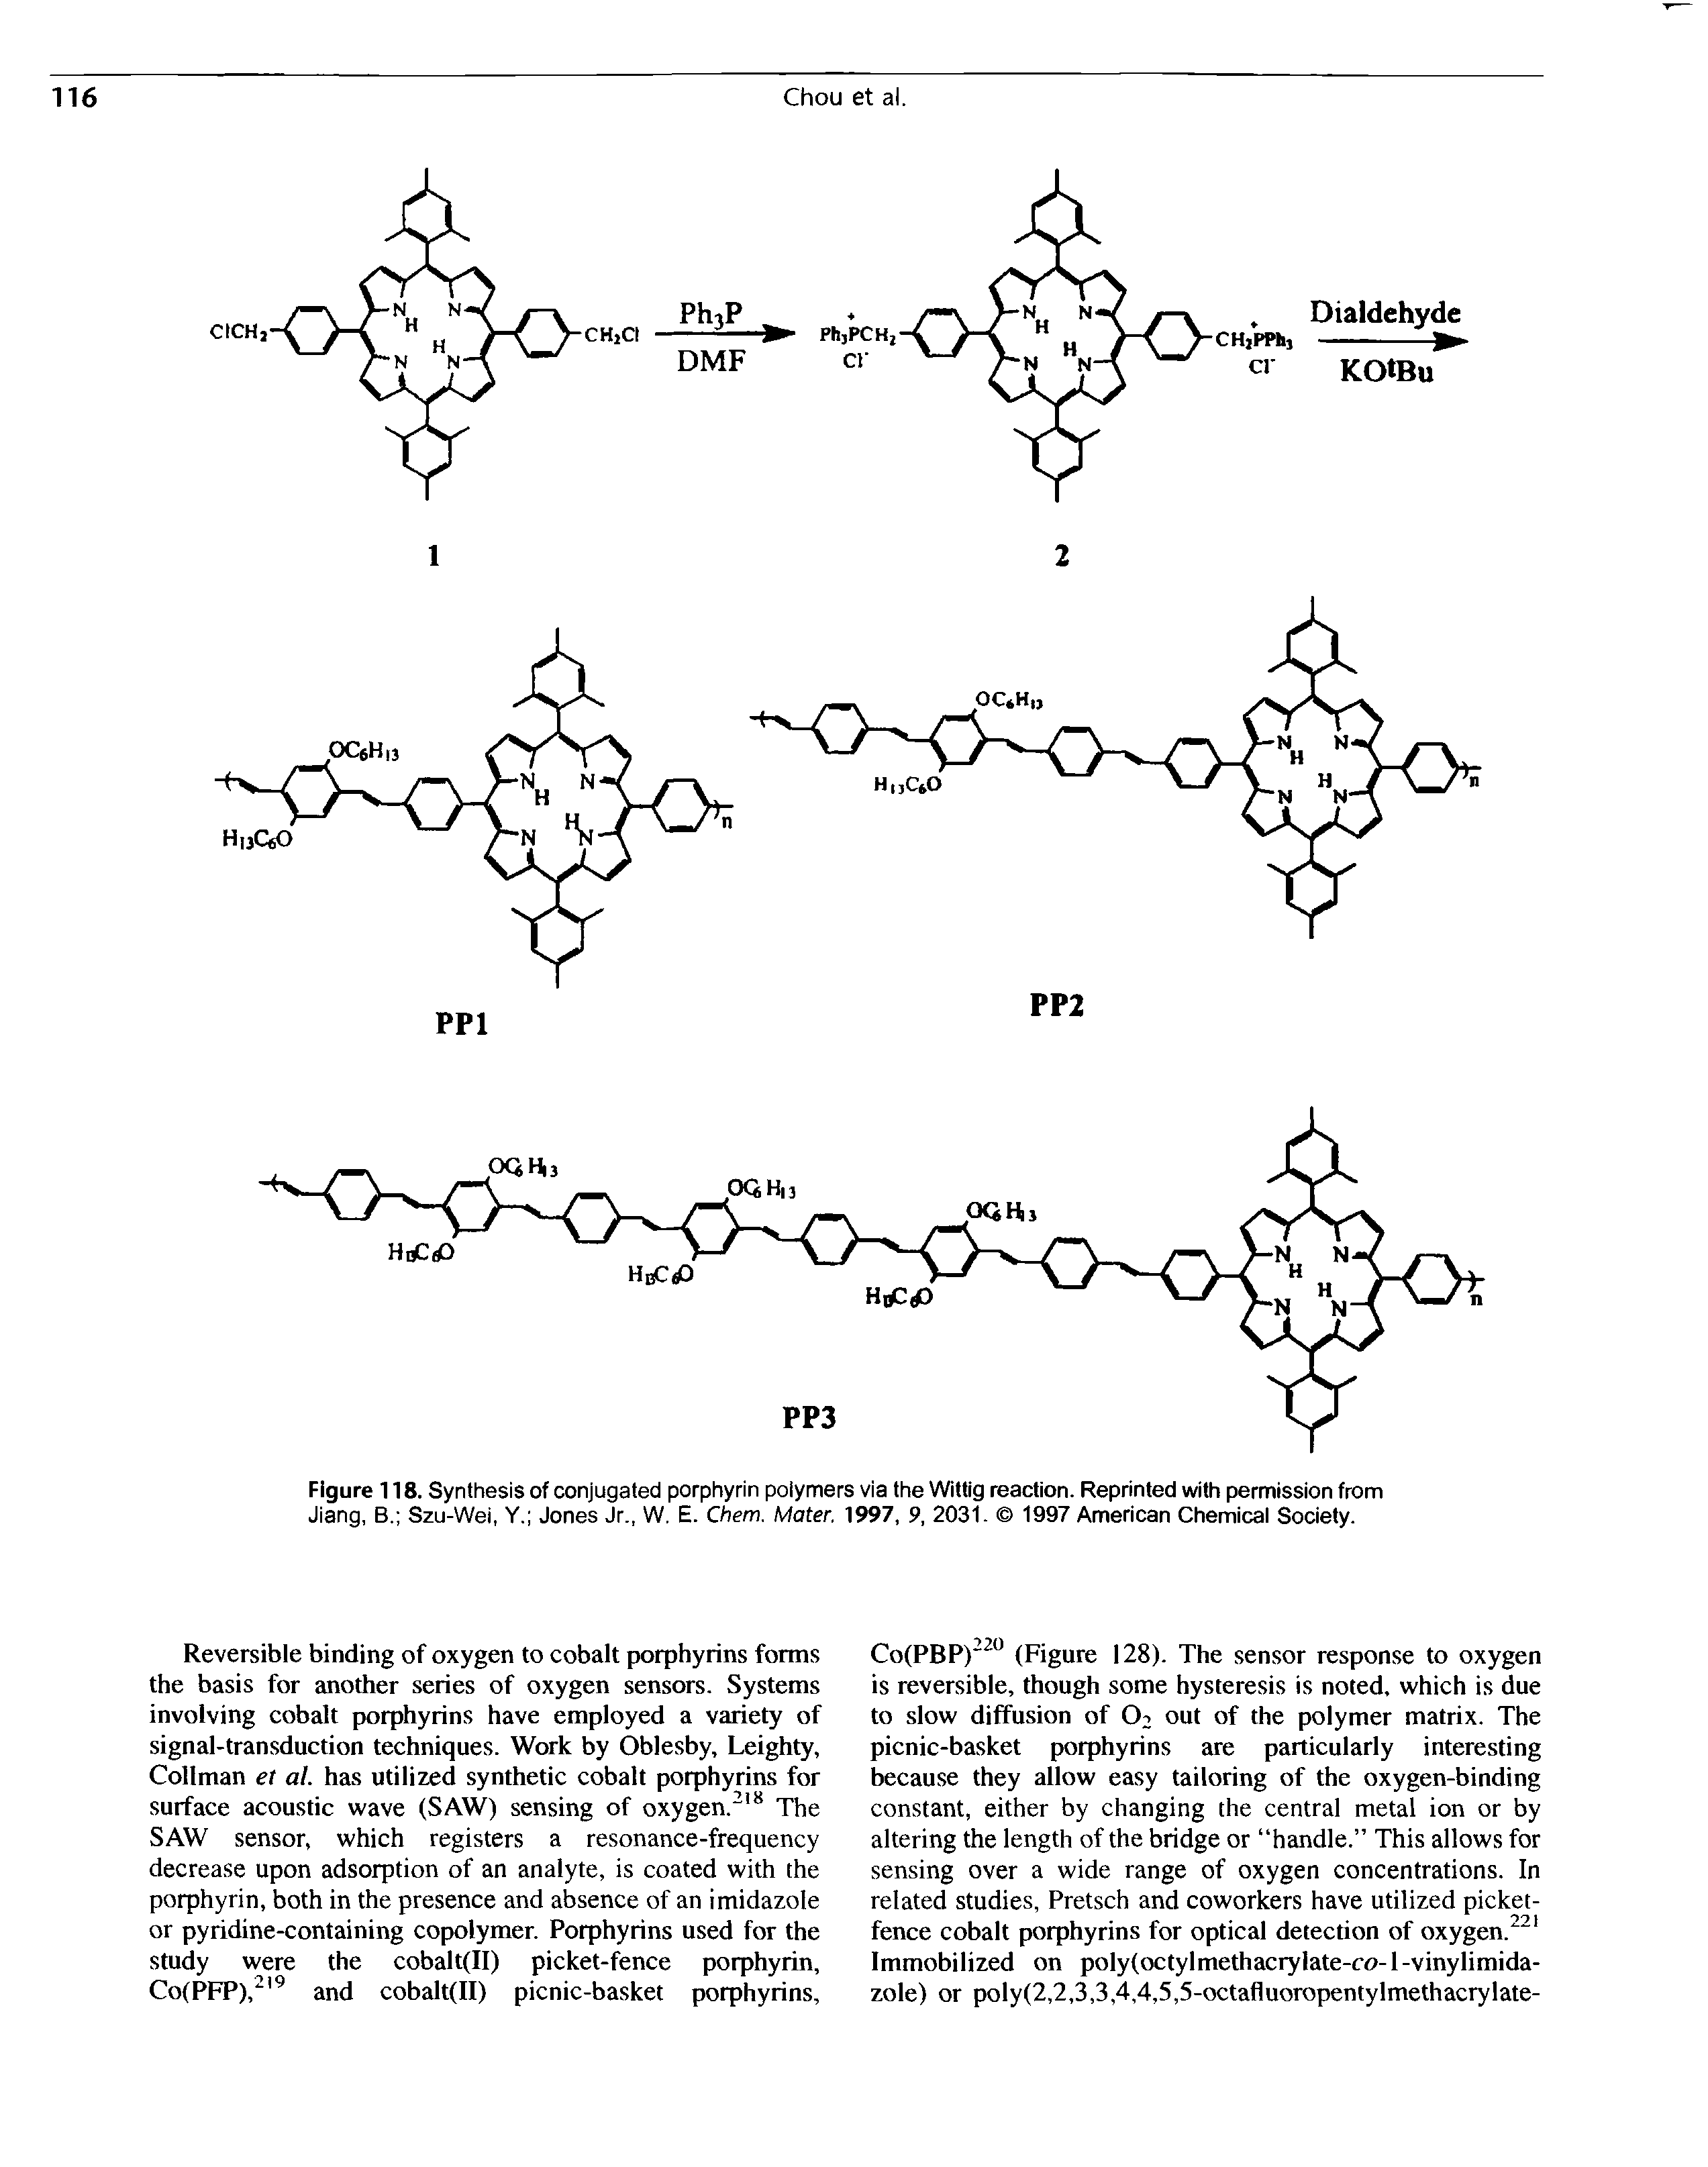 Figure 118. Synthesis of conjugated porphyrin polymers via the Wittig reaction. Reprinted with permission from Jiang, B. Szu-Wei, Y. Jones Jr., W. E. Chem. Mater. 1997, 9, 2031. 1997 American Chemical Society.